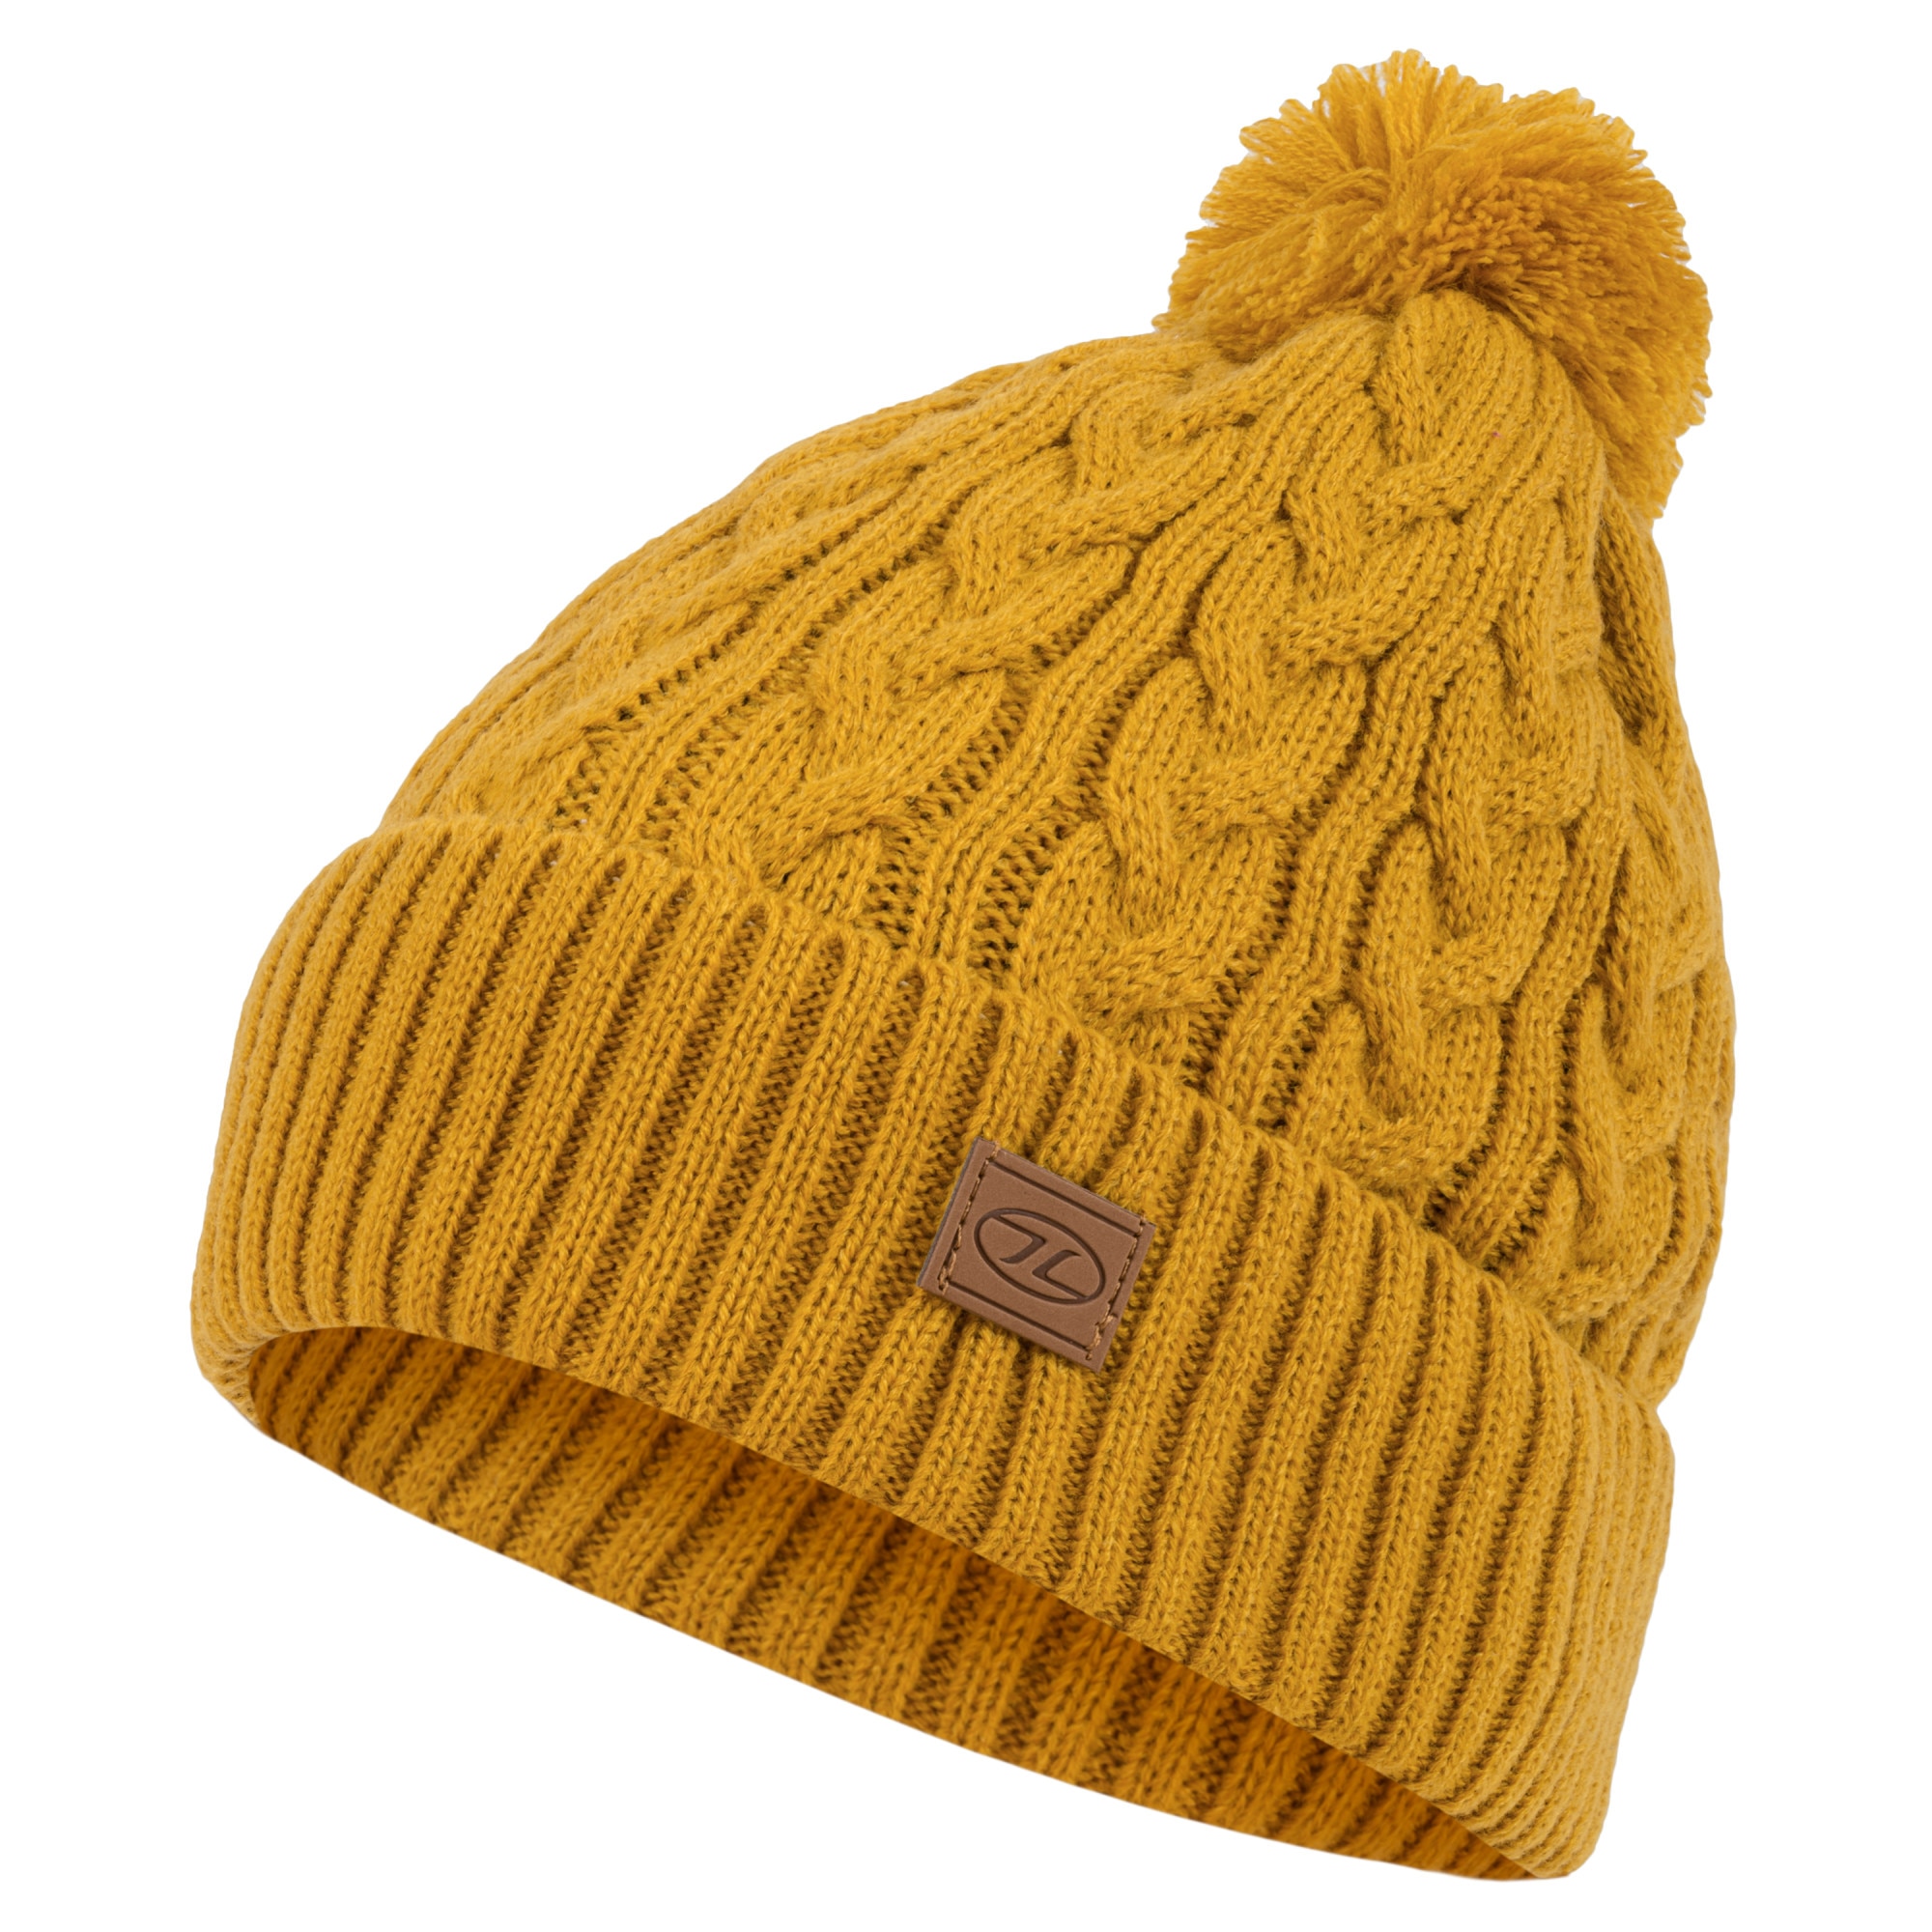 Extremely important Ancient times Grab Caciula Highlander Beira Bobble Hat, Galben - eMAG.ro